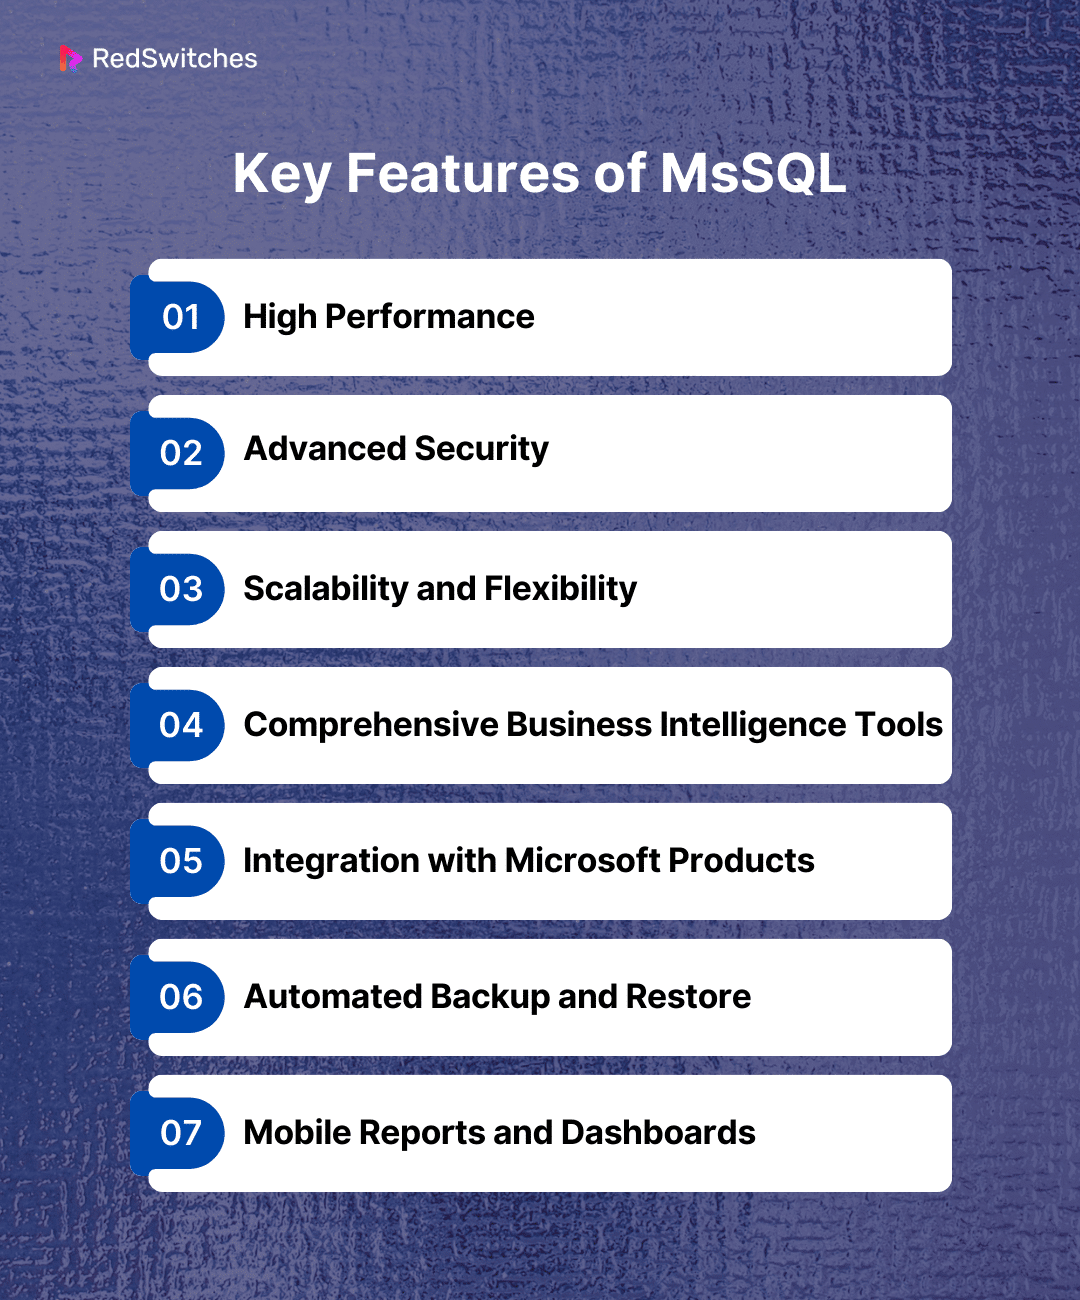 Key Features of MsSQL